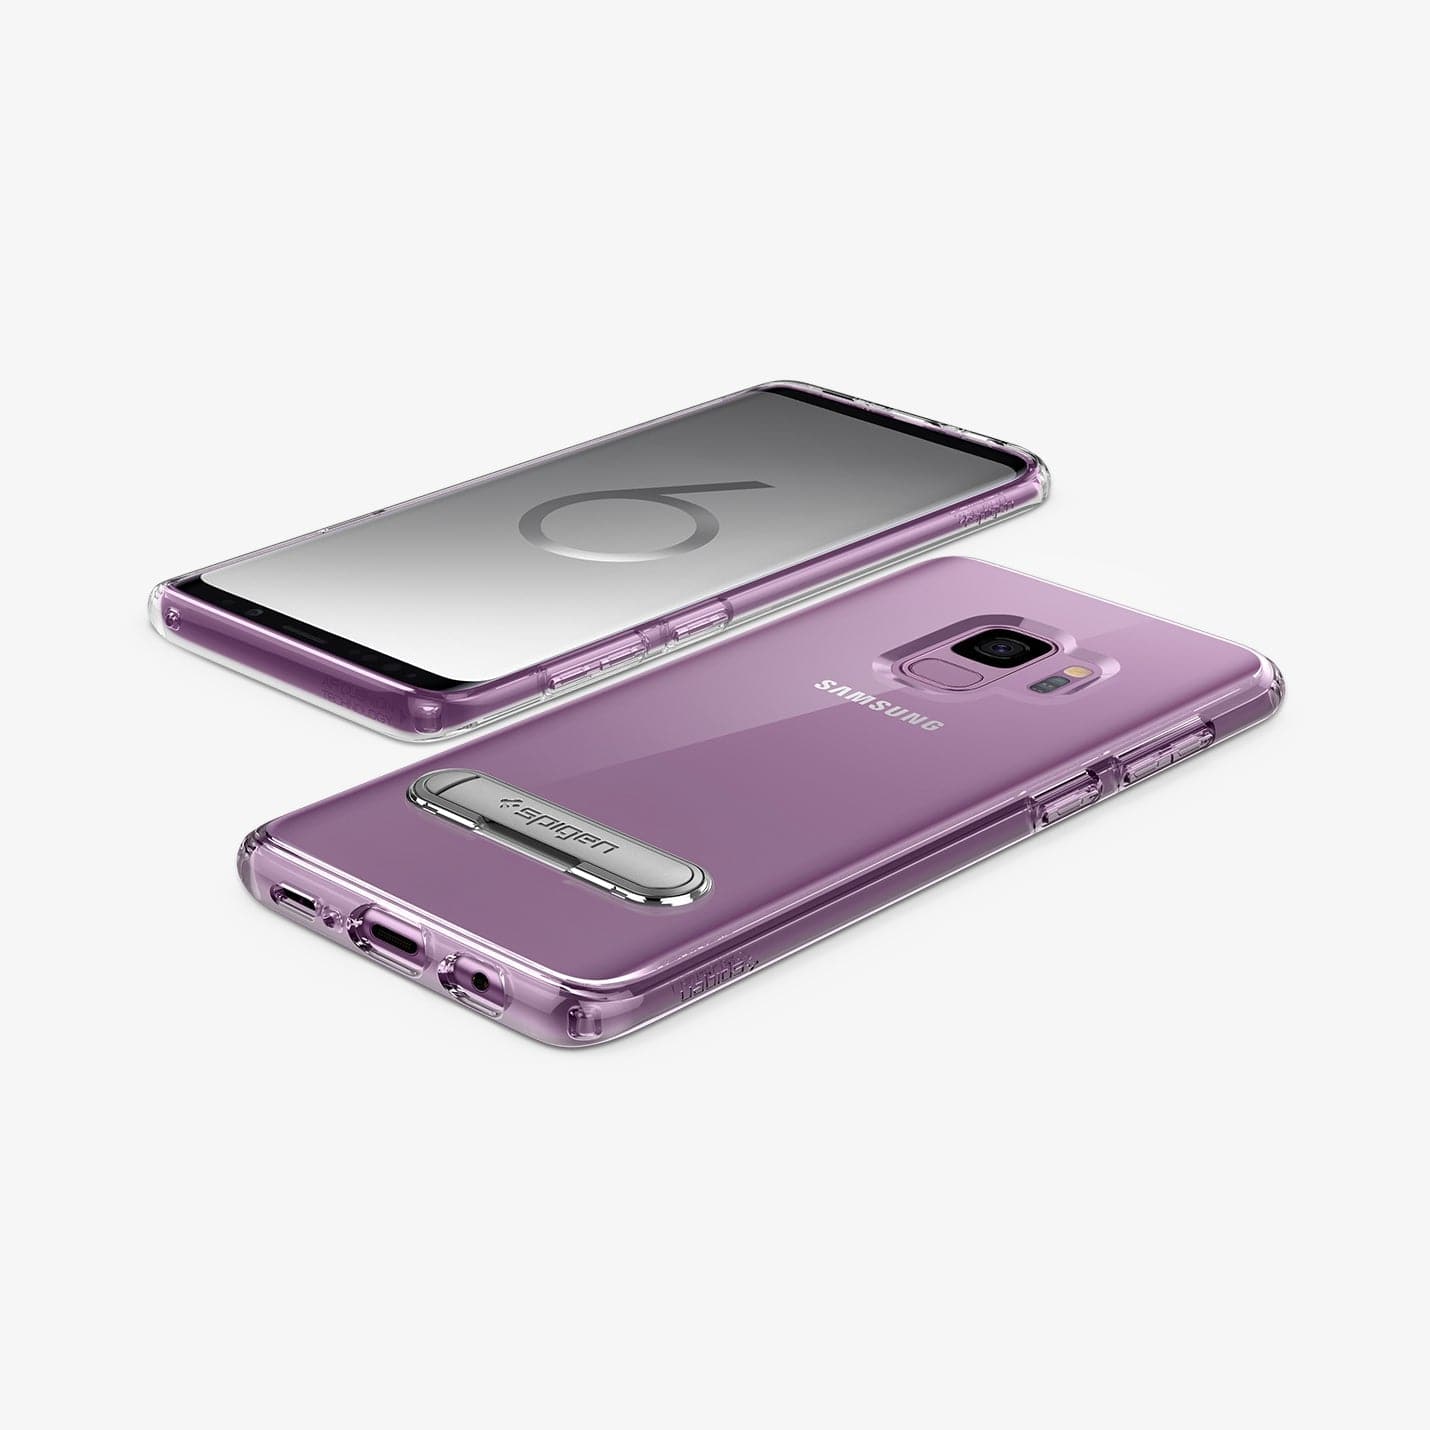 592CS22841 - Galaxy S9 Series Ultra Hybrid S Case in crystal clear showing the back, front, sides and bottom